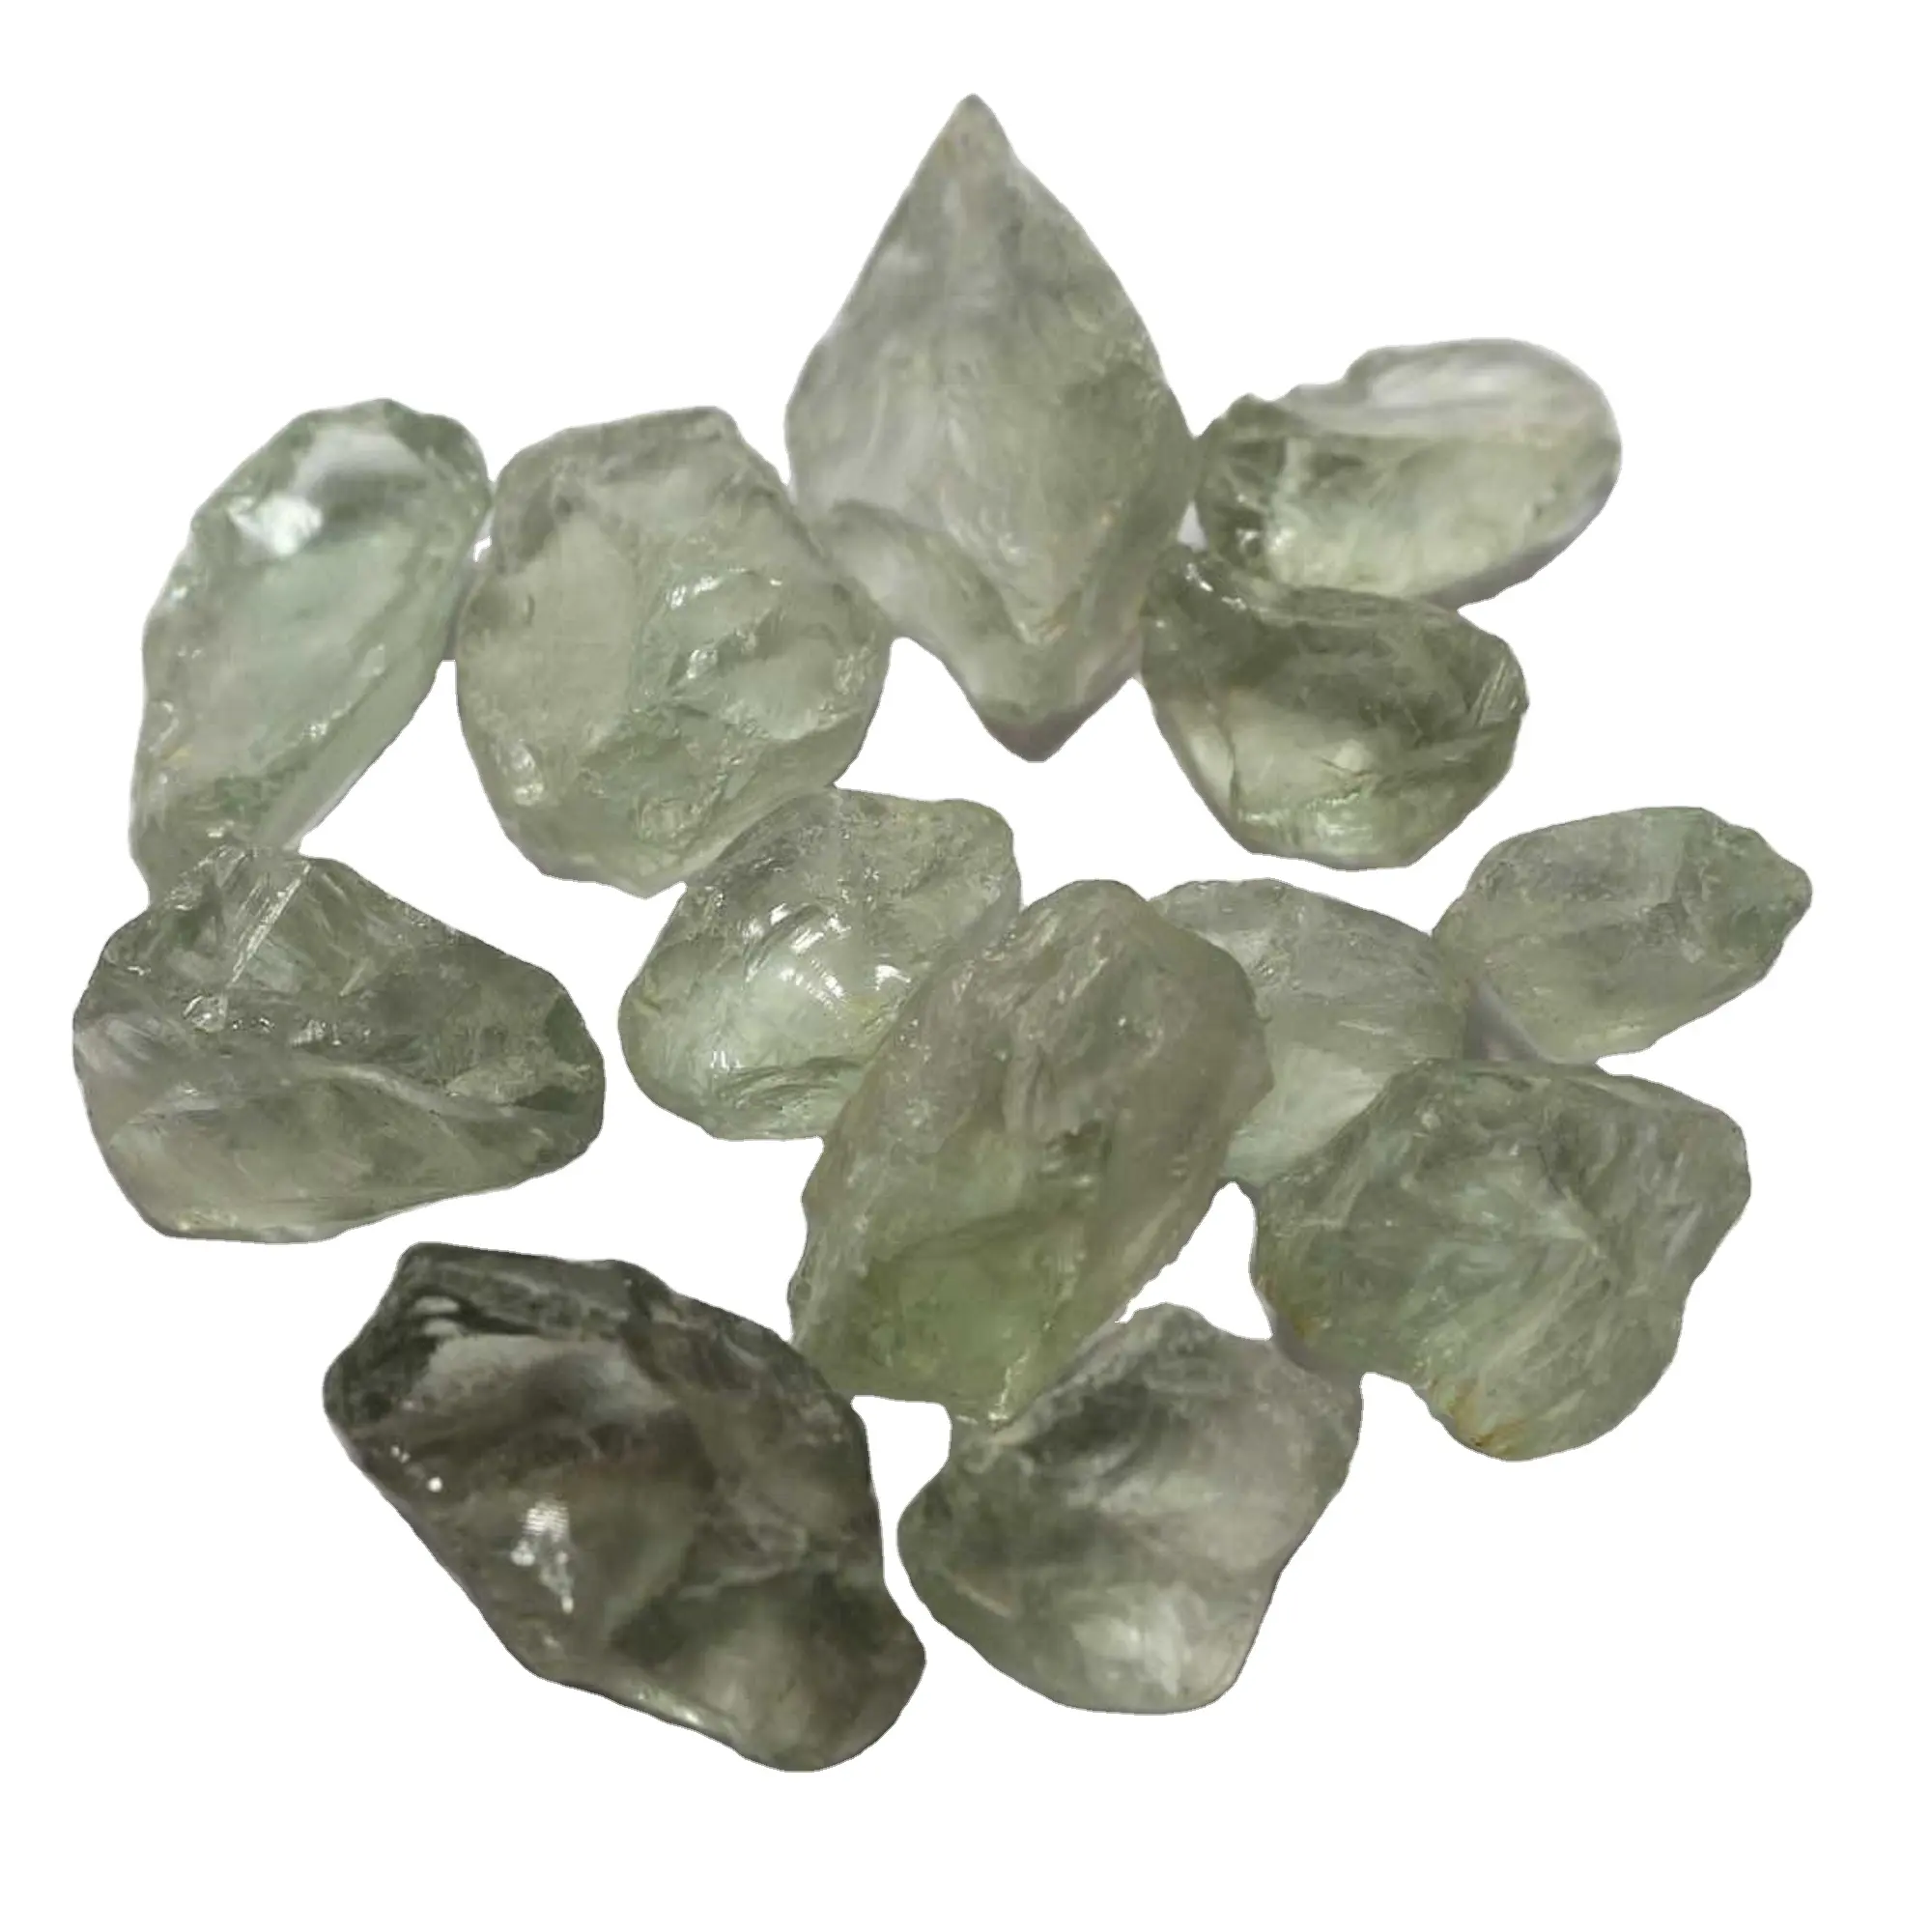 Natural Original Green Amethyst Gemstone Rough Nuggets Factory Price Wholesale For Jewelry Making Healing Rough